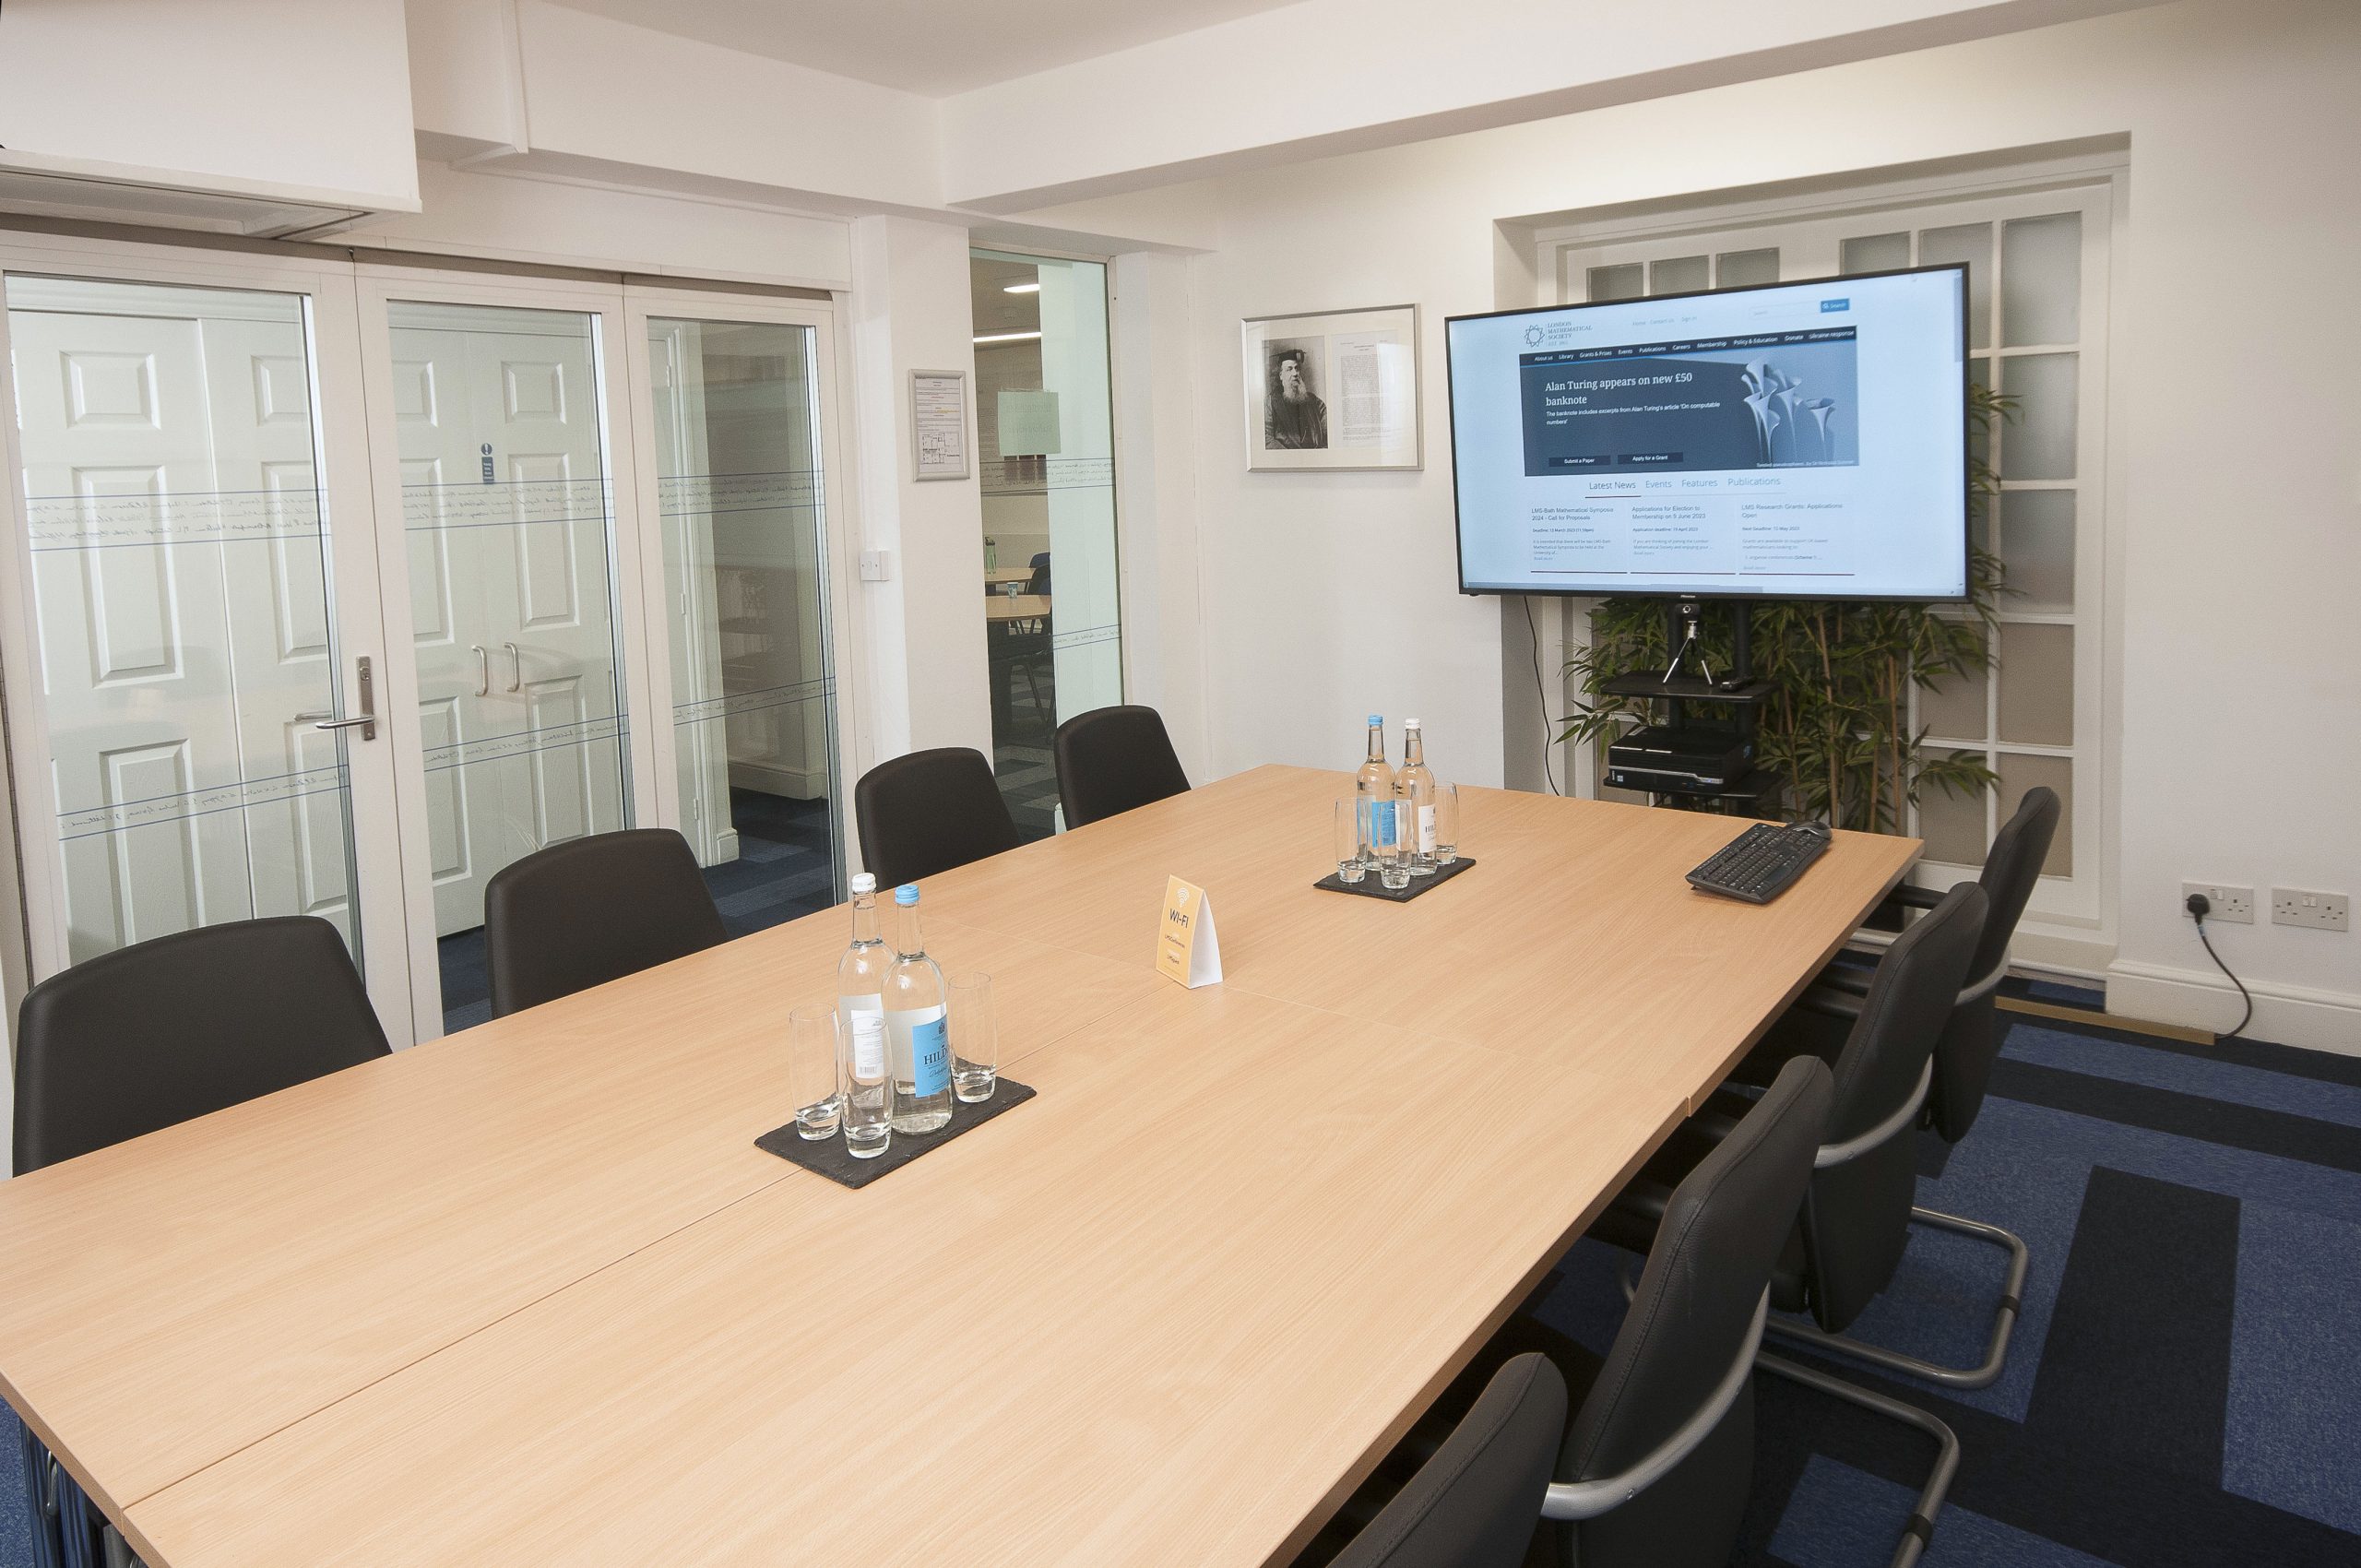 Photo of a small sized meeting room in a boardroom style